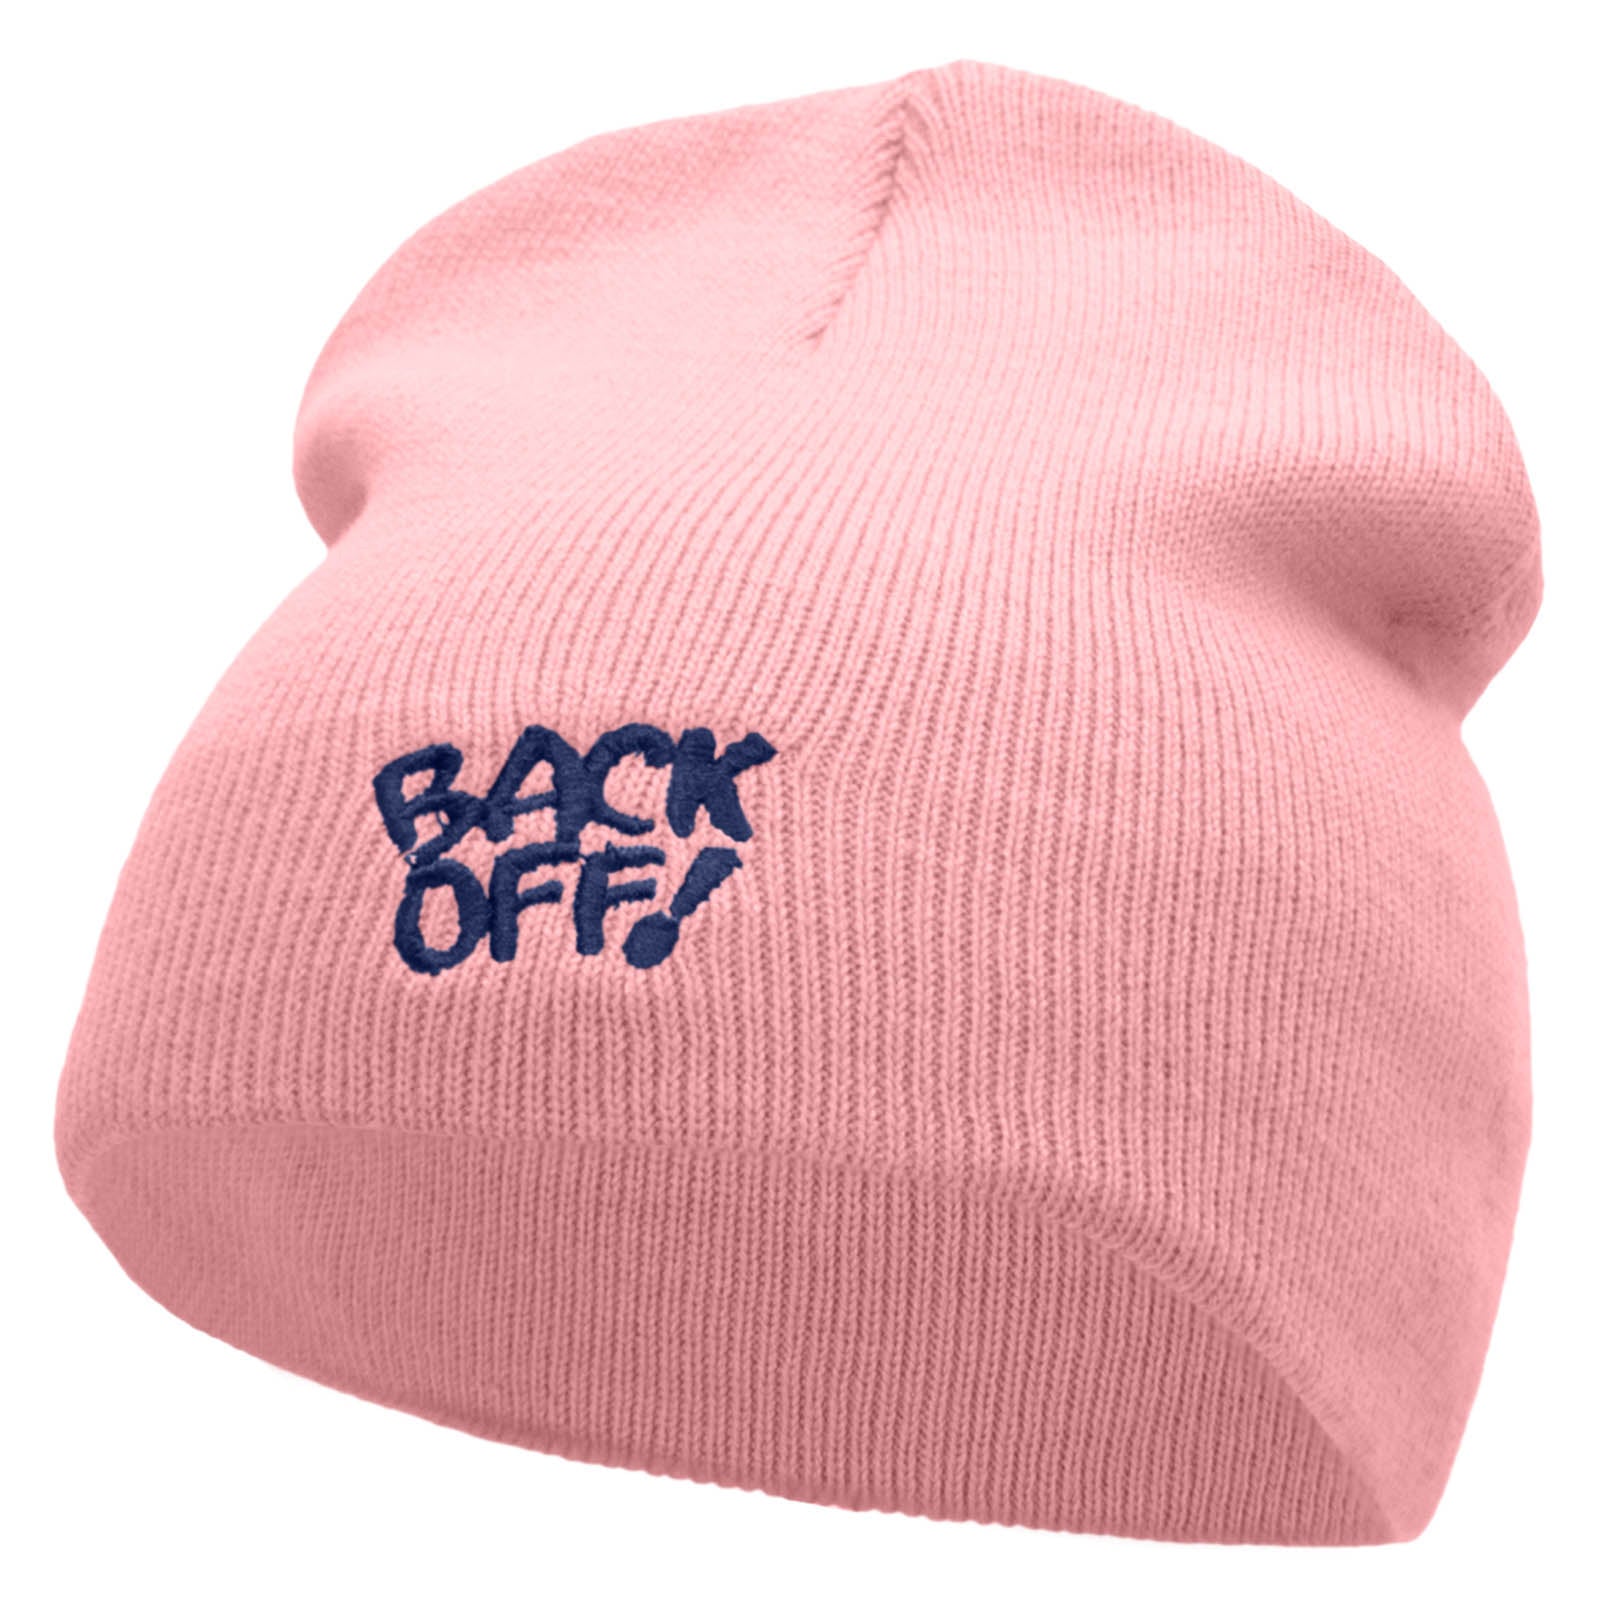 Back Off Saying Embroidered Short Beanie - Pink OSFM